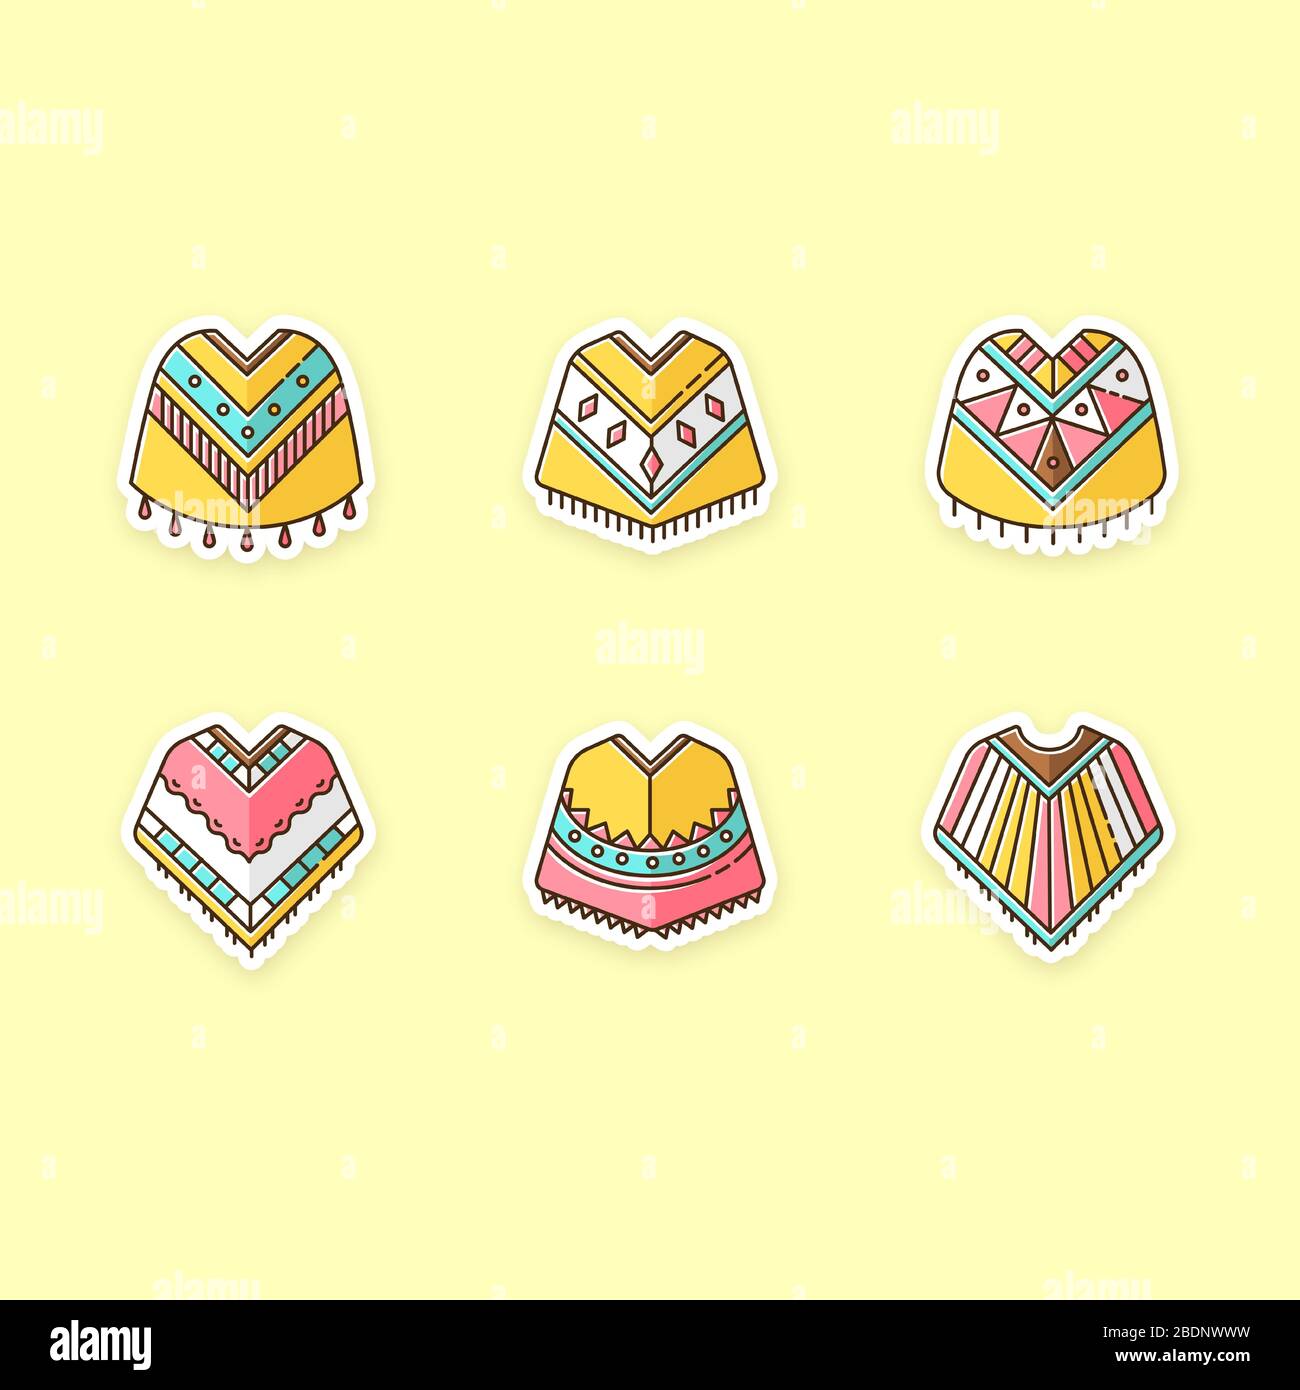 Poncho printable patches. Mexican, Peruvian, Brazilian wear. RGB color stickers, pins and badges set. Motley warm woolen clothes. Simple indian Stock Vector